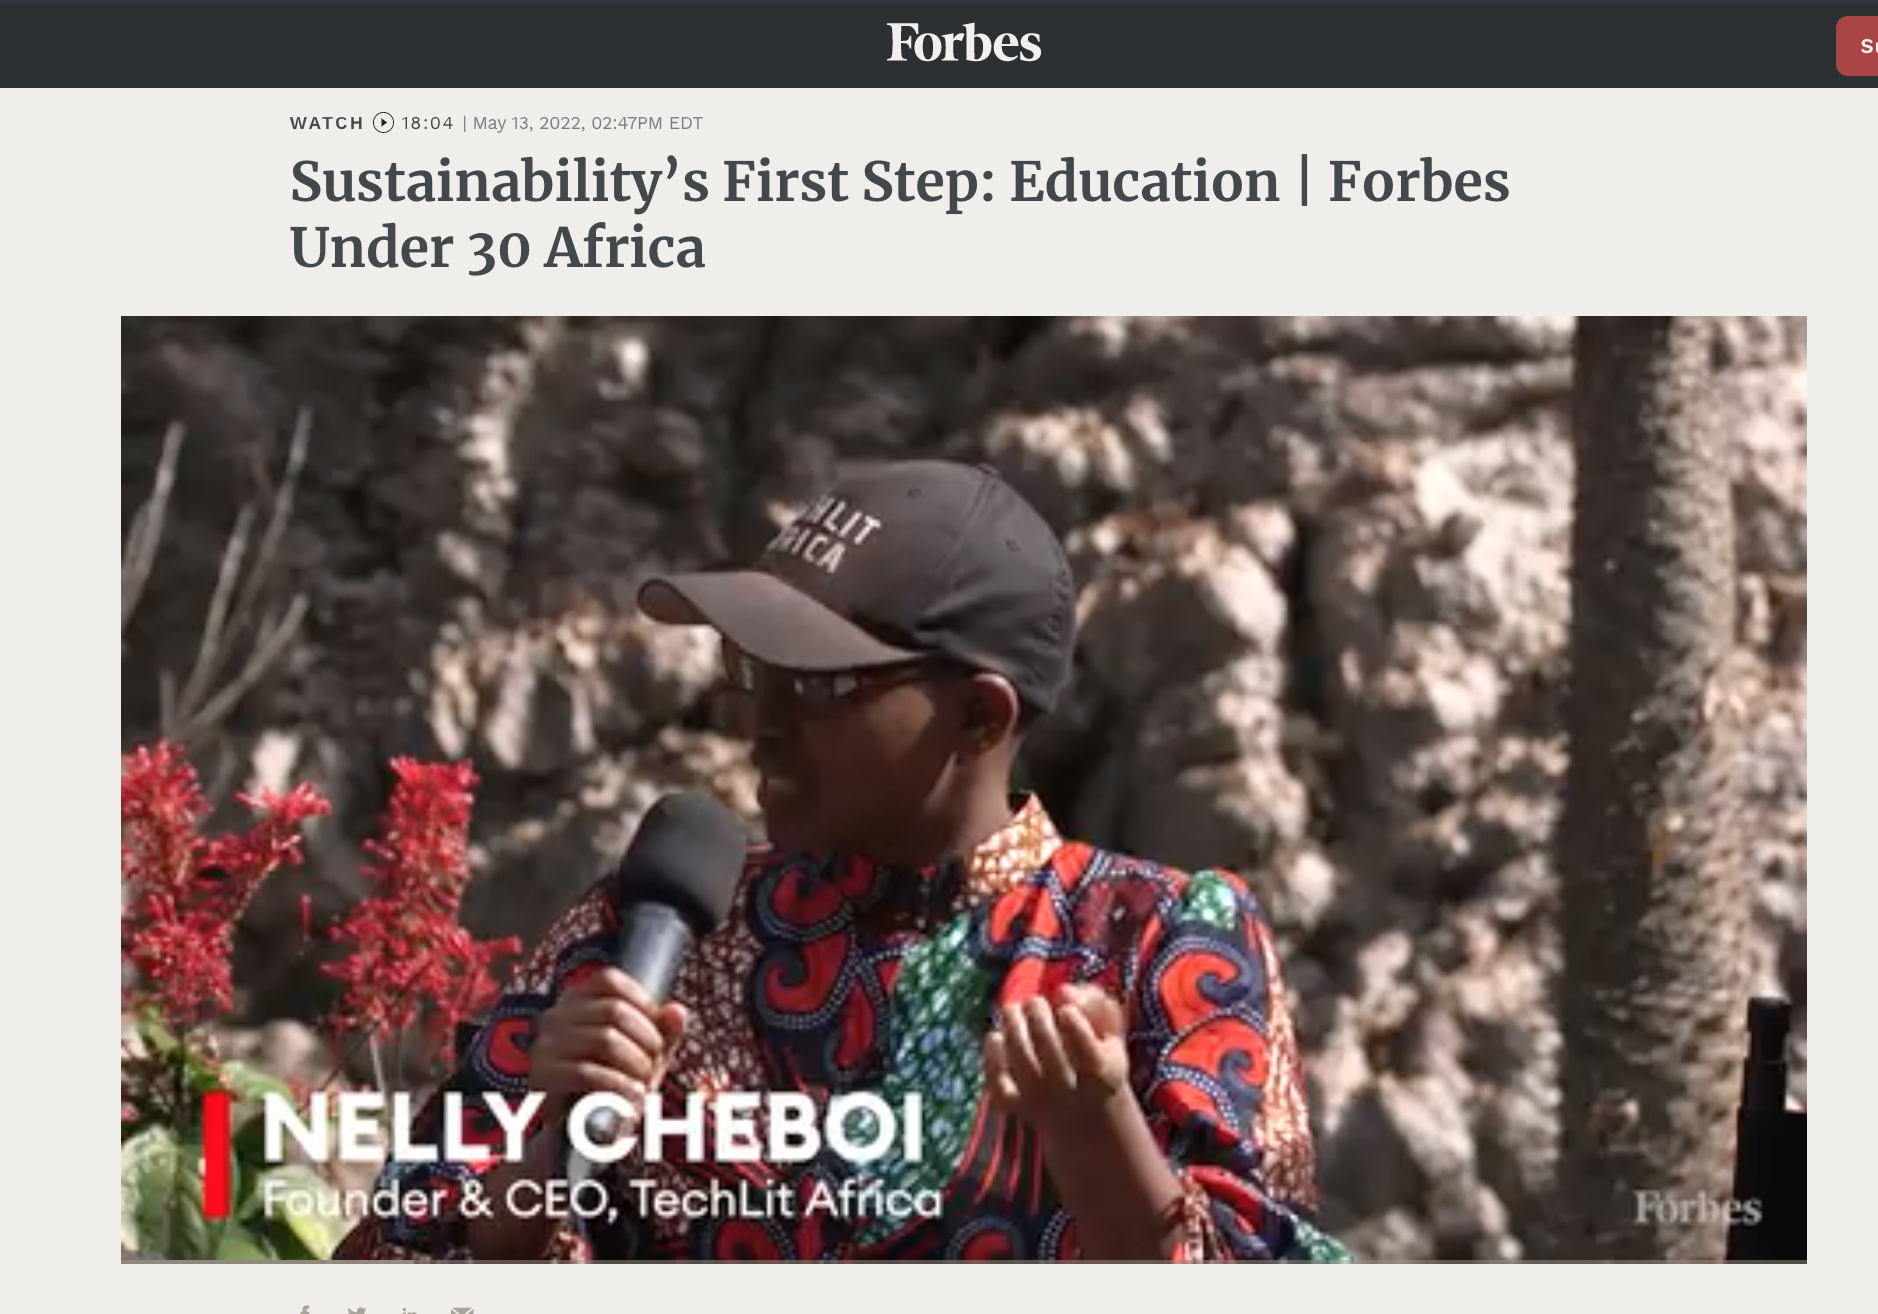 Nelly Cheboi on Forbes Under 30 Africa panel in Botswana